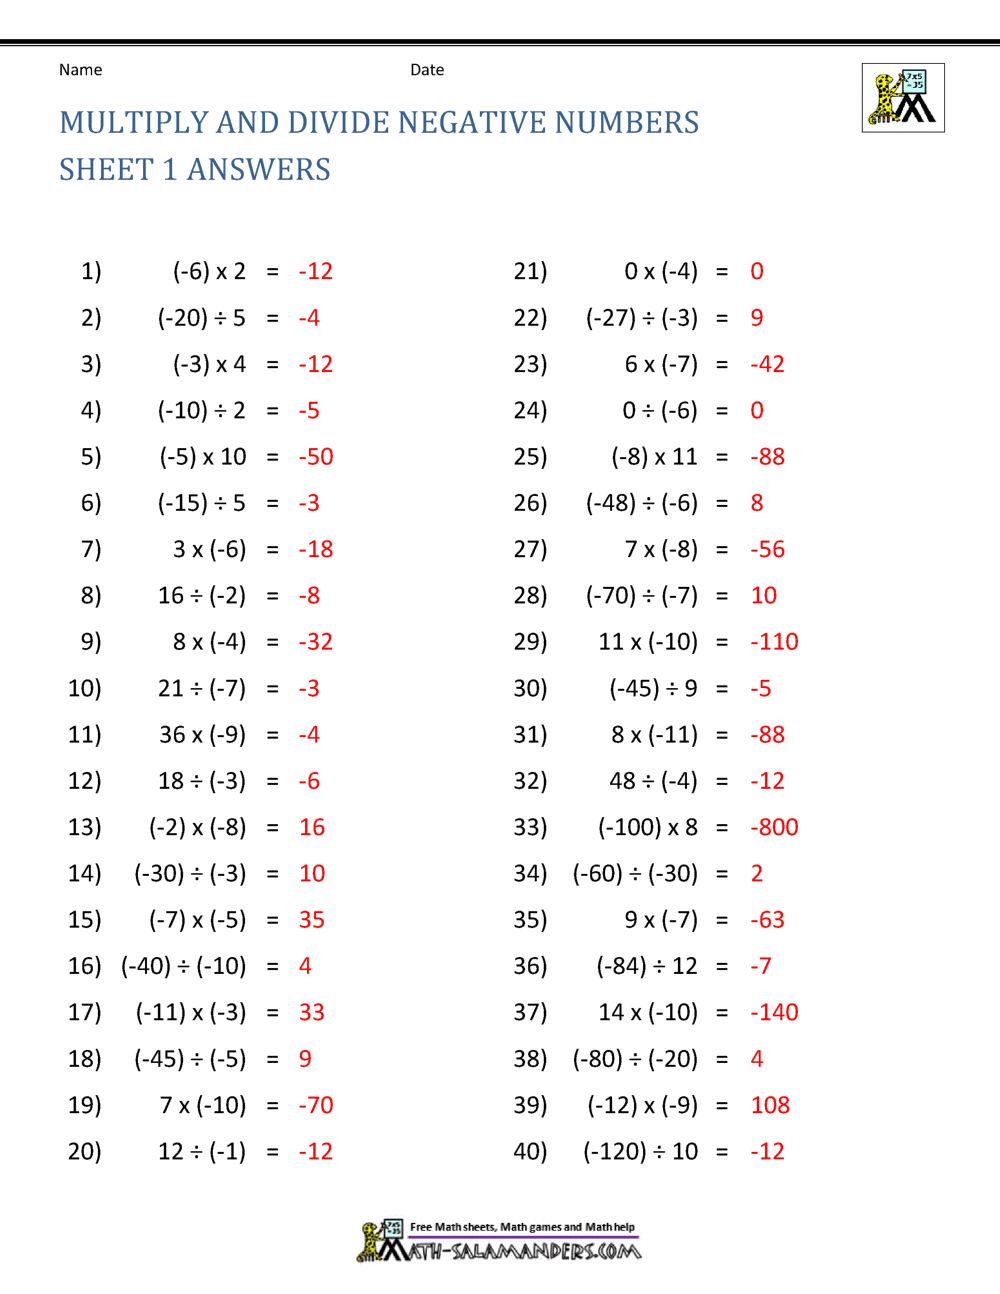 Multiply and Divide Negative Numbers With Multiplying Negative Numbers Worksheet